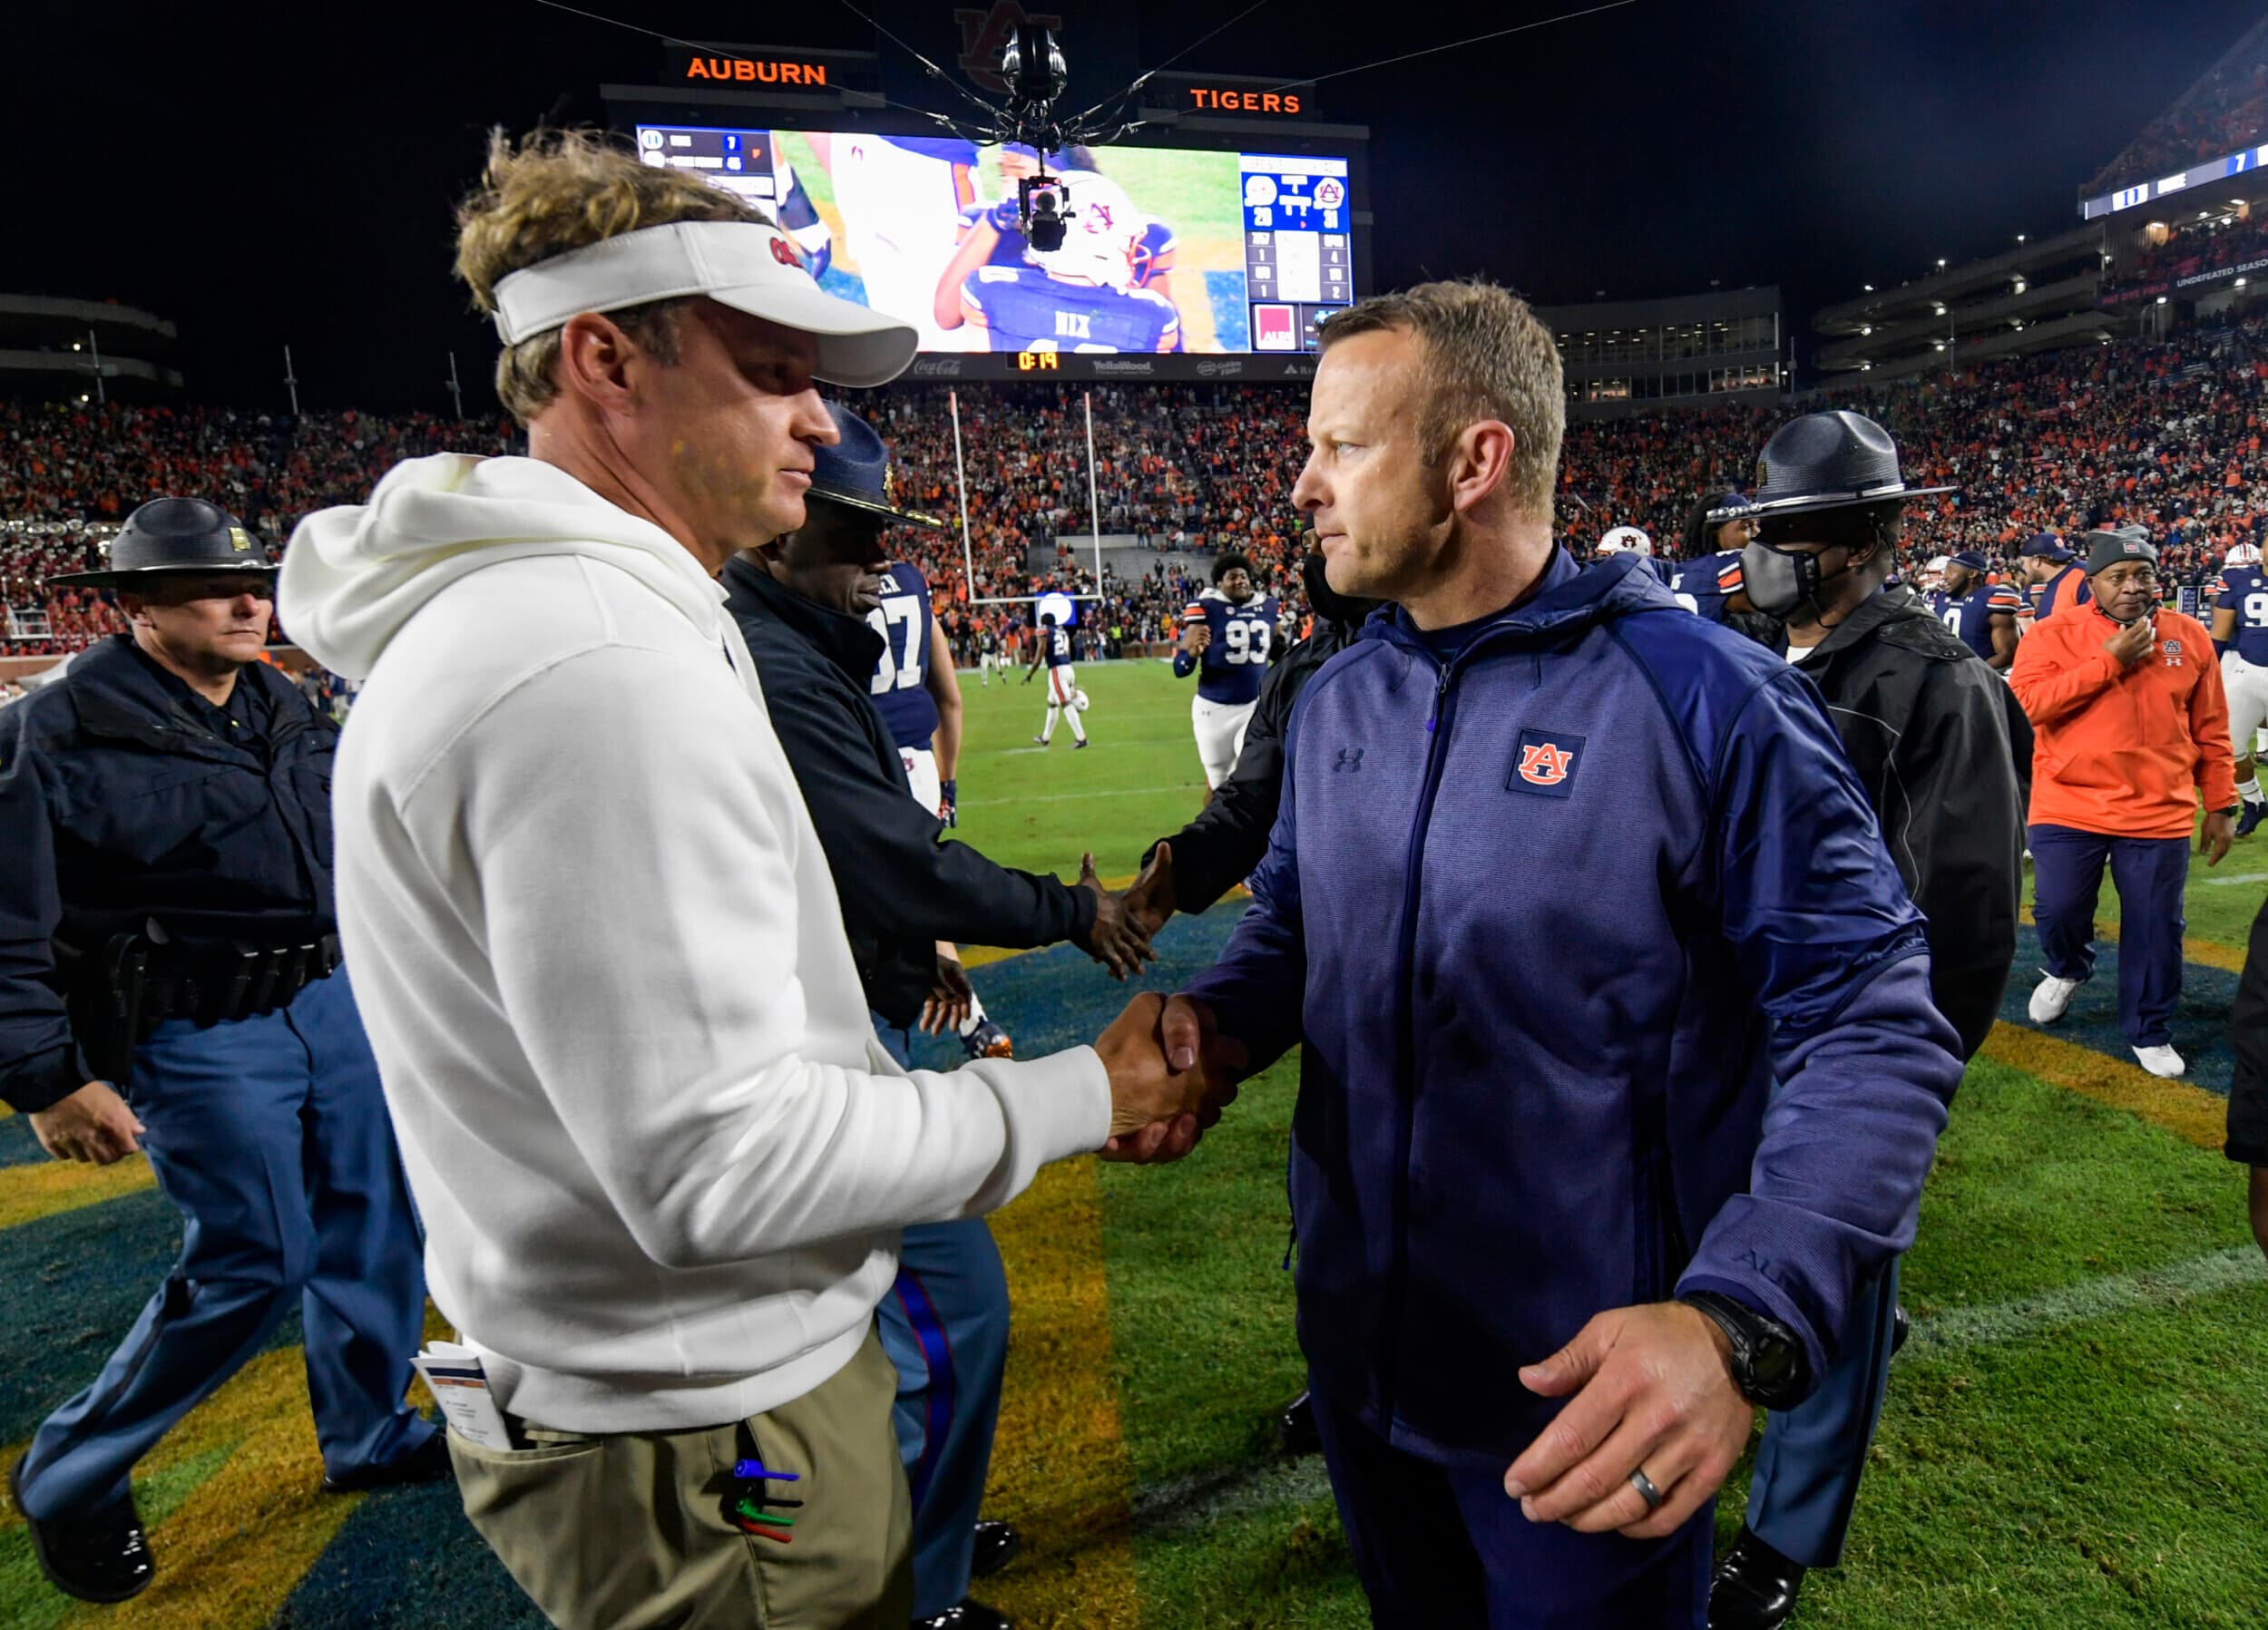 Auburn, AL, USA; Coach Bryan Harsin reacts with Lane Kiffin after the game between Auburn and Ole Miss at Jordan-Hare Stadium.